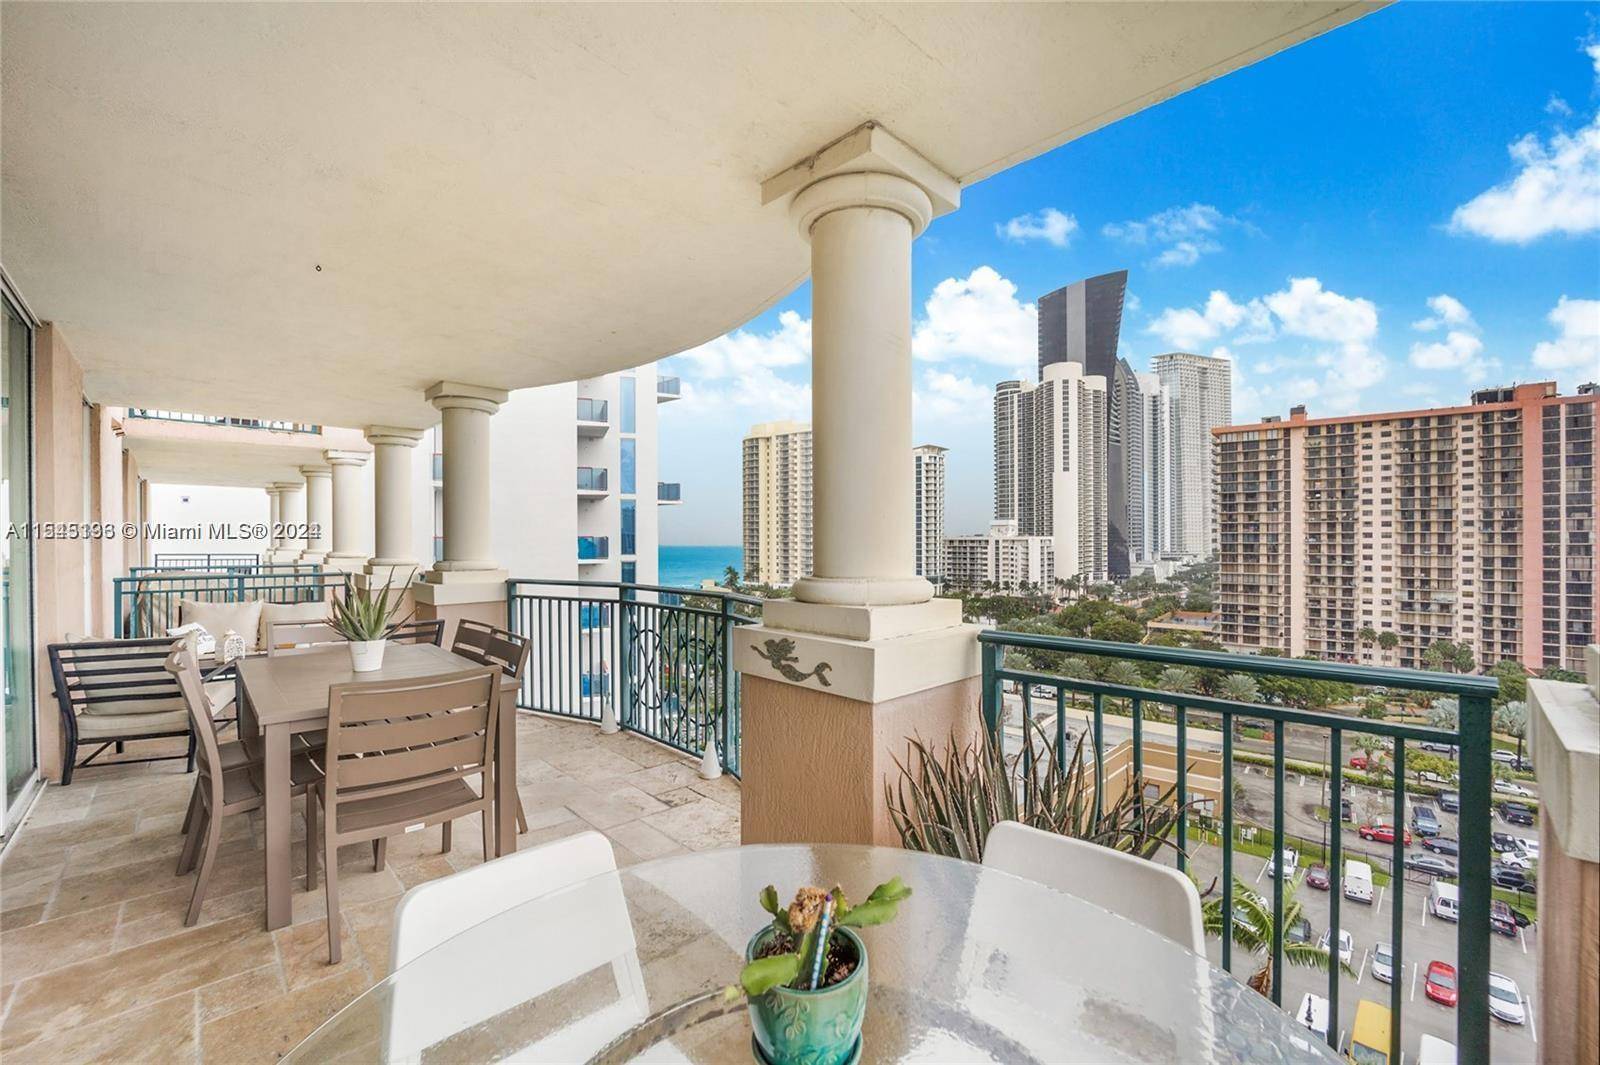 Enjoy the Florida lifestyle at its best living at this resort like amenities midrise building Along with being a BLOCK away from the SPECTACULAR SUNNY ISLES BEACH.